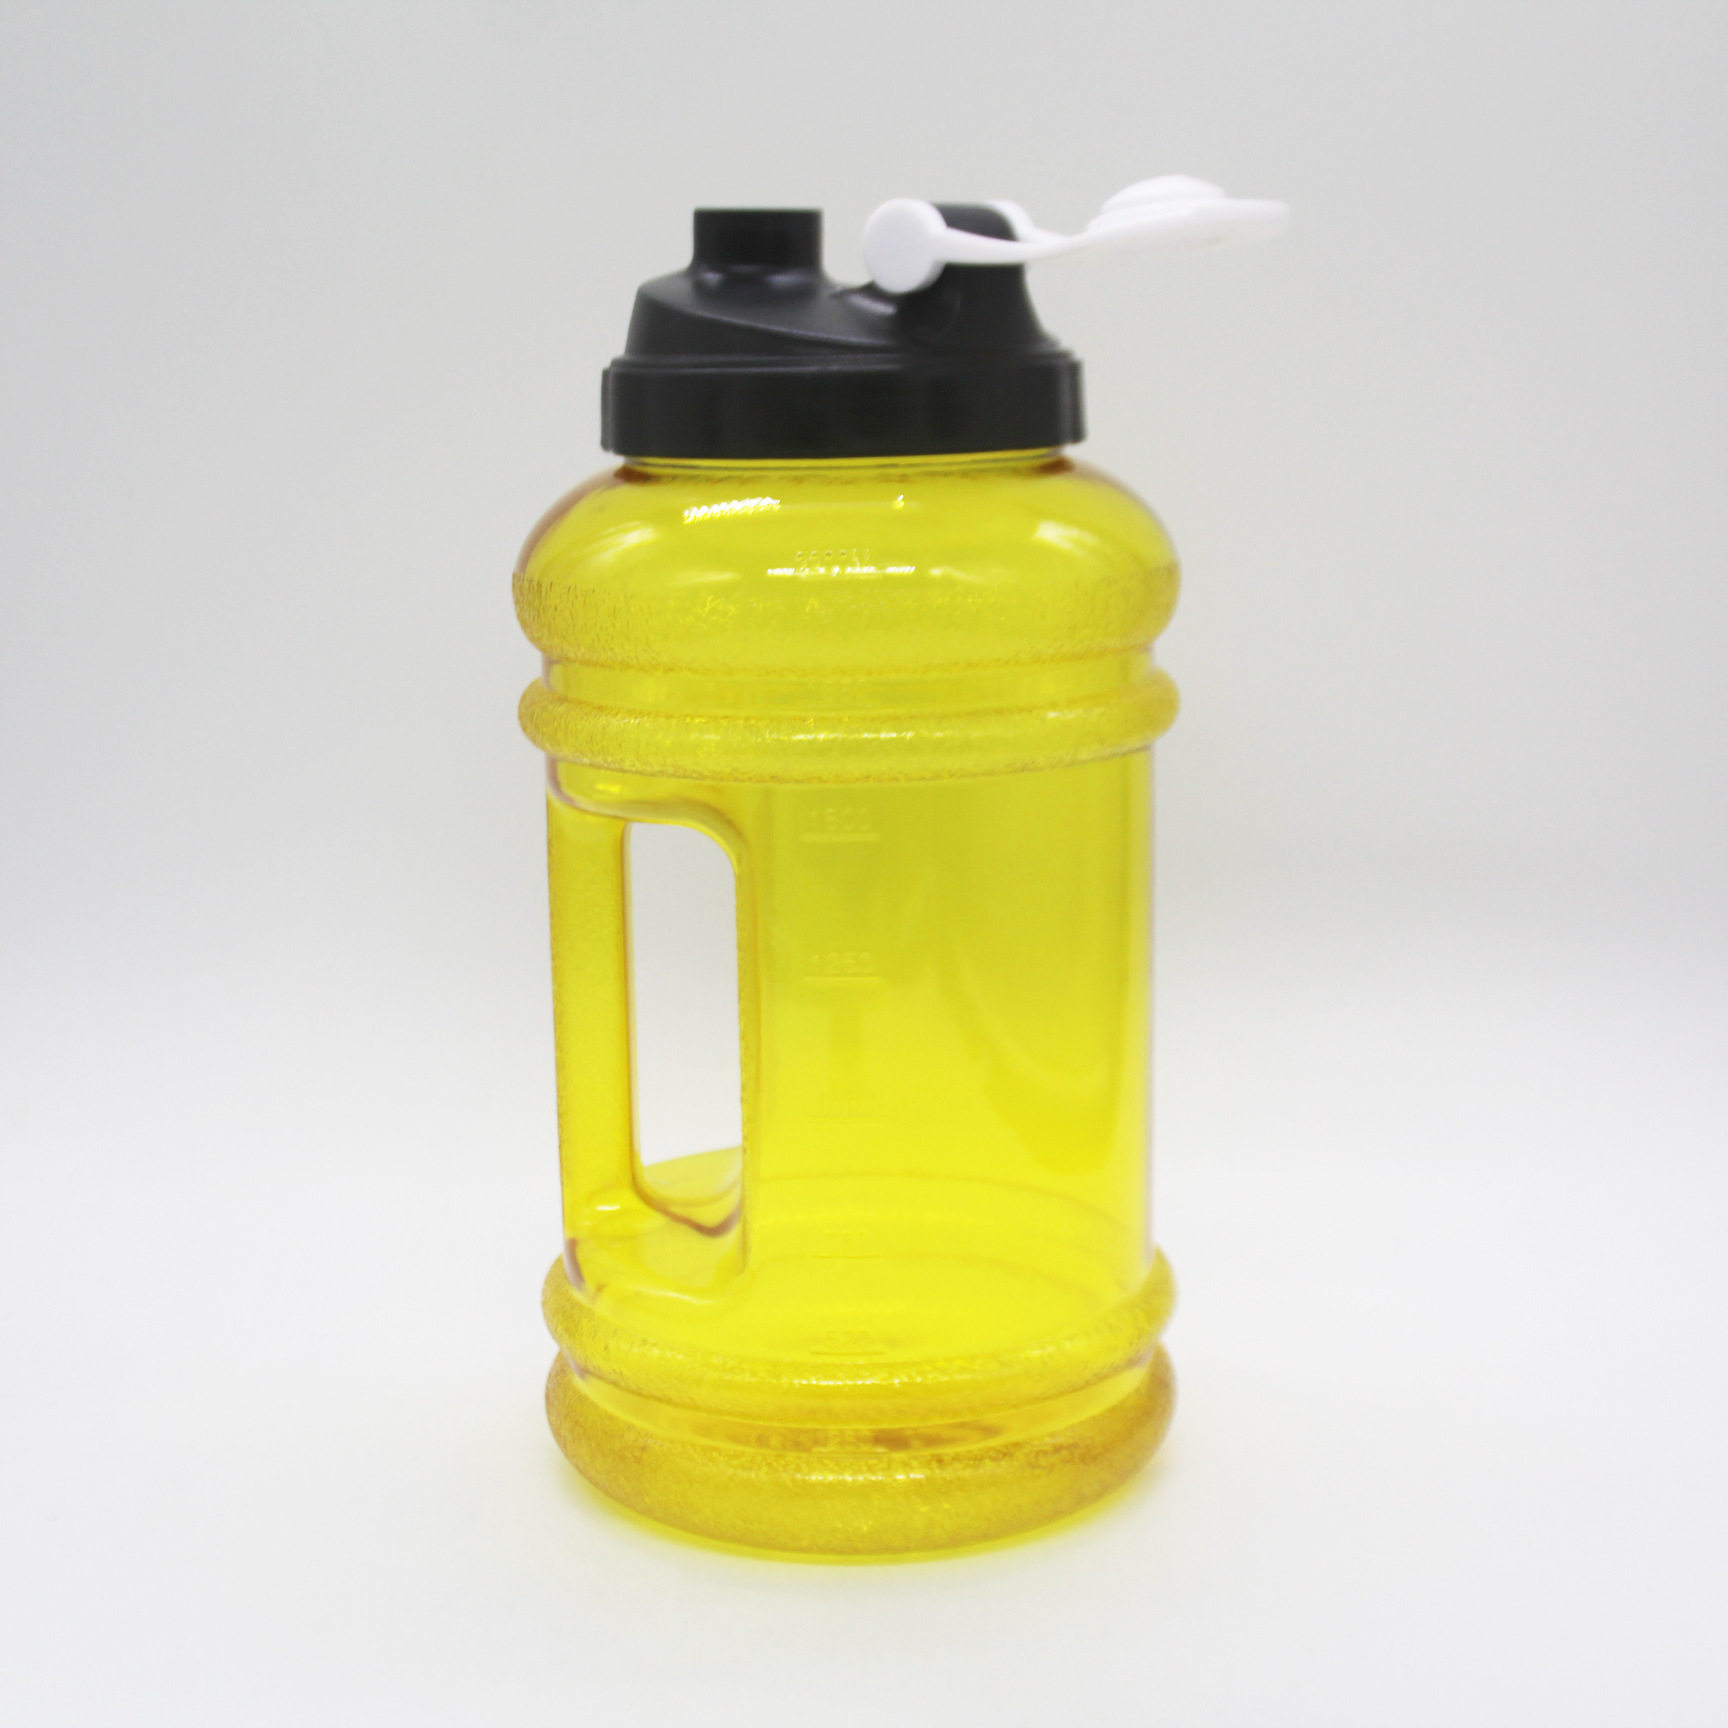 Portable bucket with handle of sports kettle|74oz